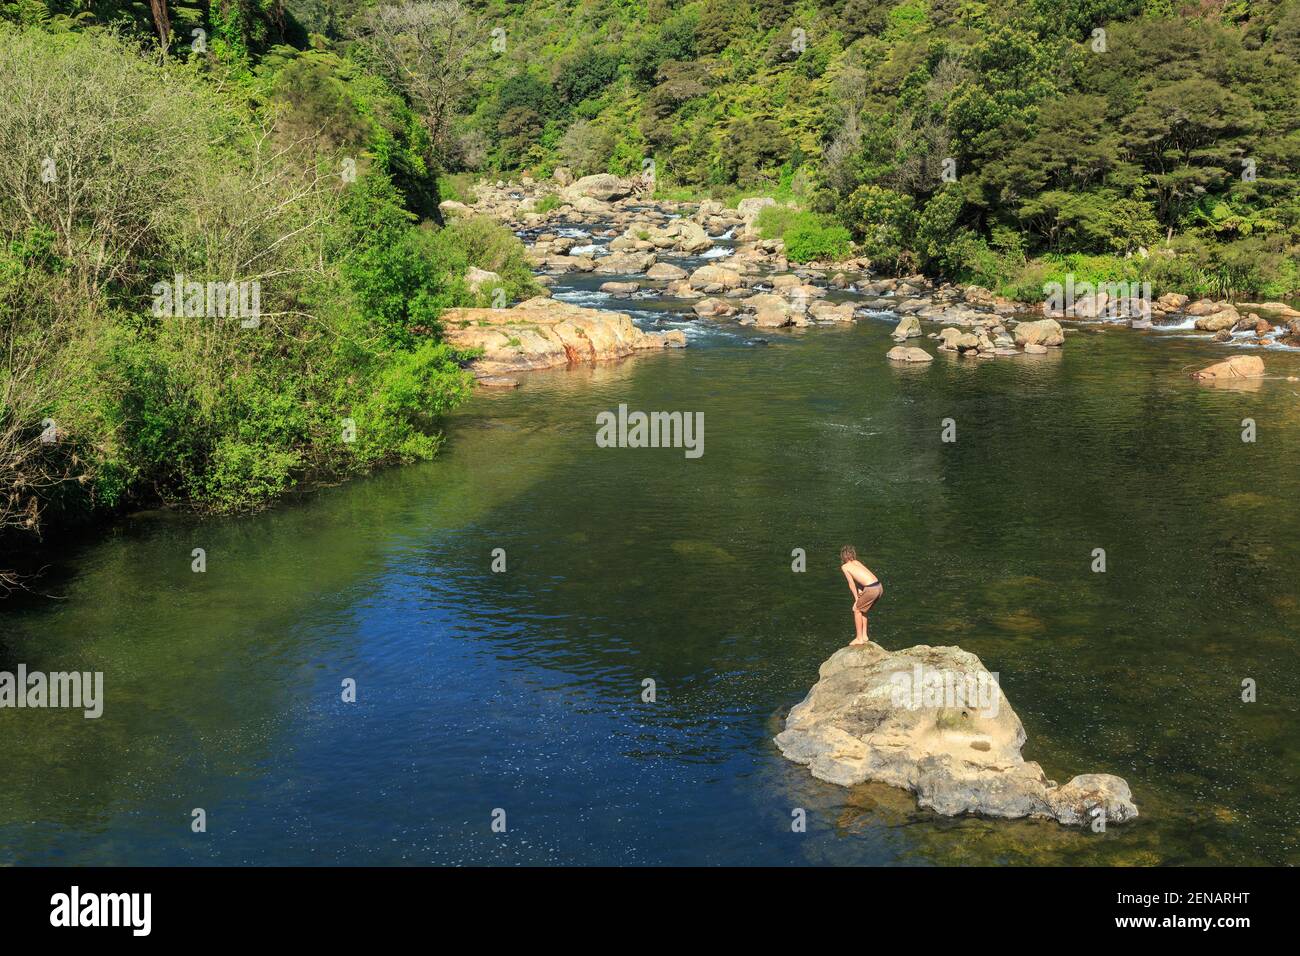 A rocky river cascading out of forested hills into a swimming hole in the Karangahake Gorge, New Zealand Stock Photo